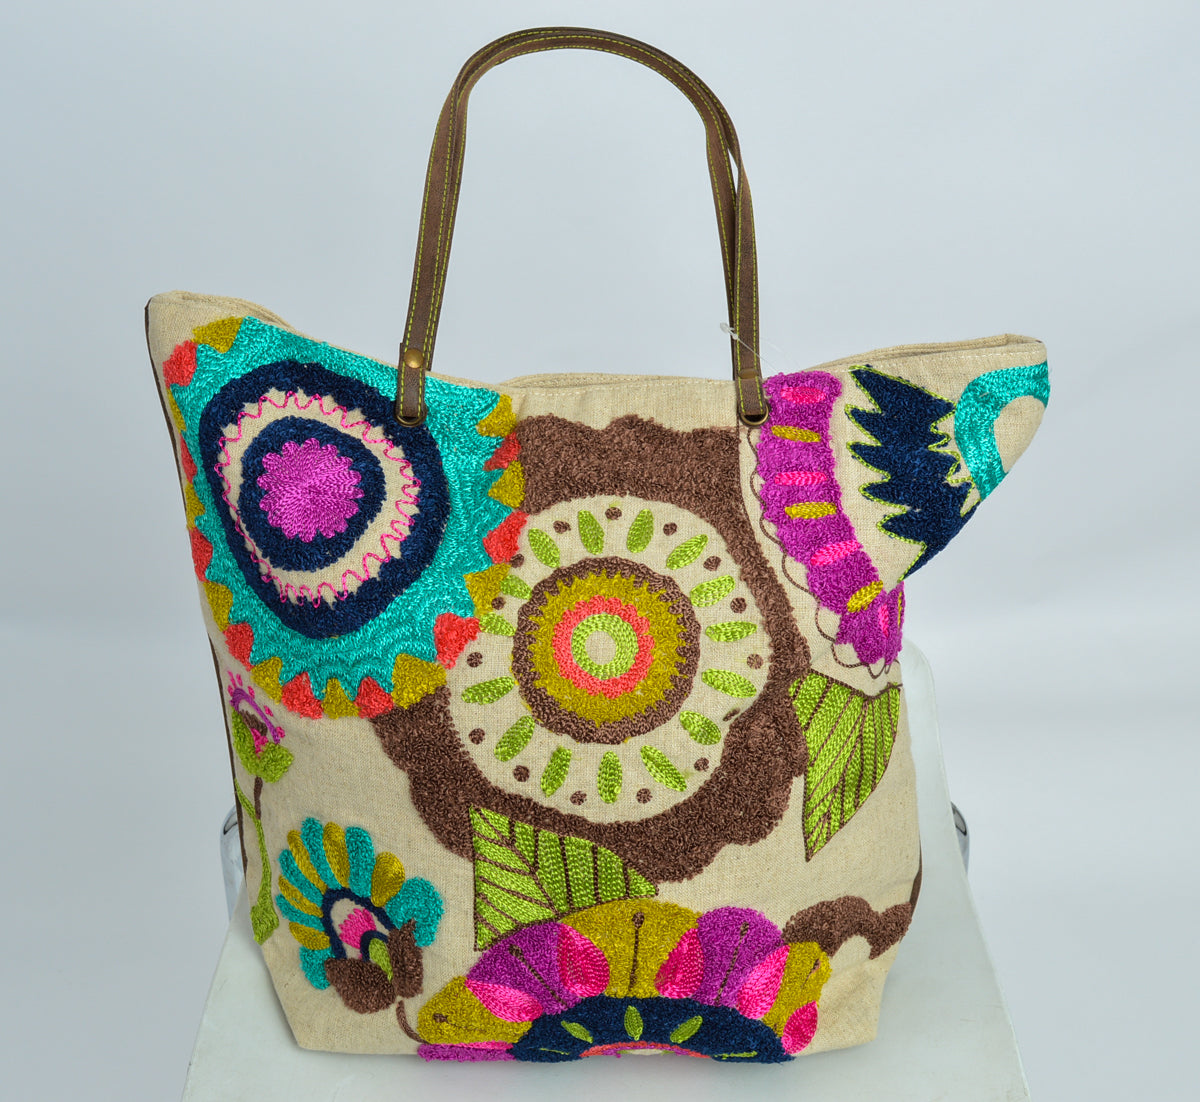 Beautifully embroidered canvas tote bag with leather handles